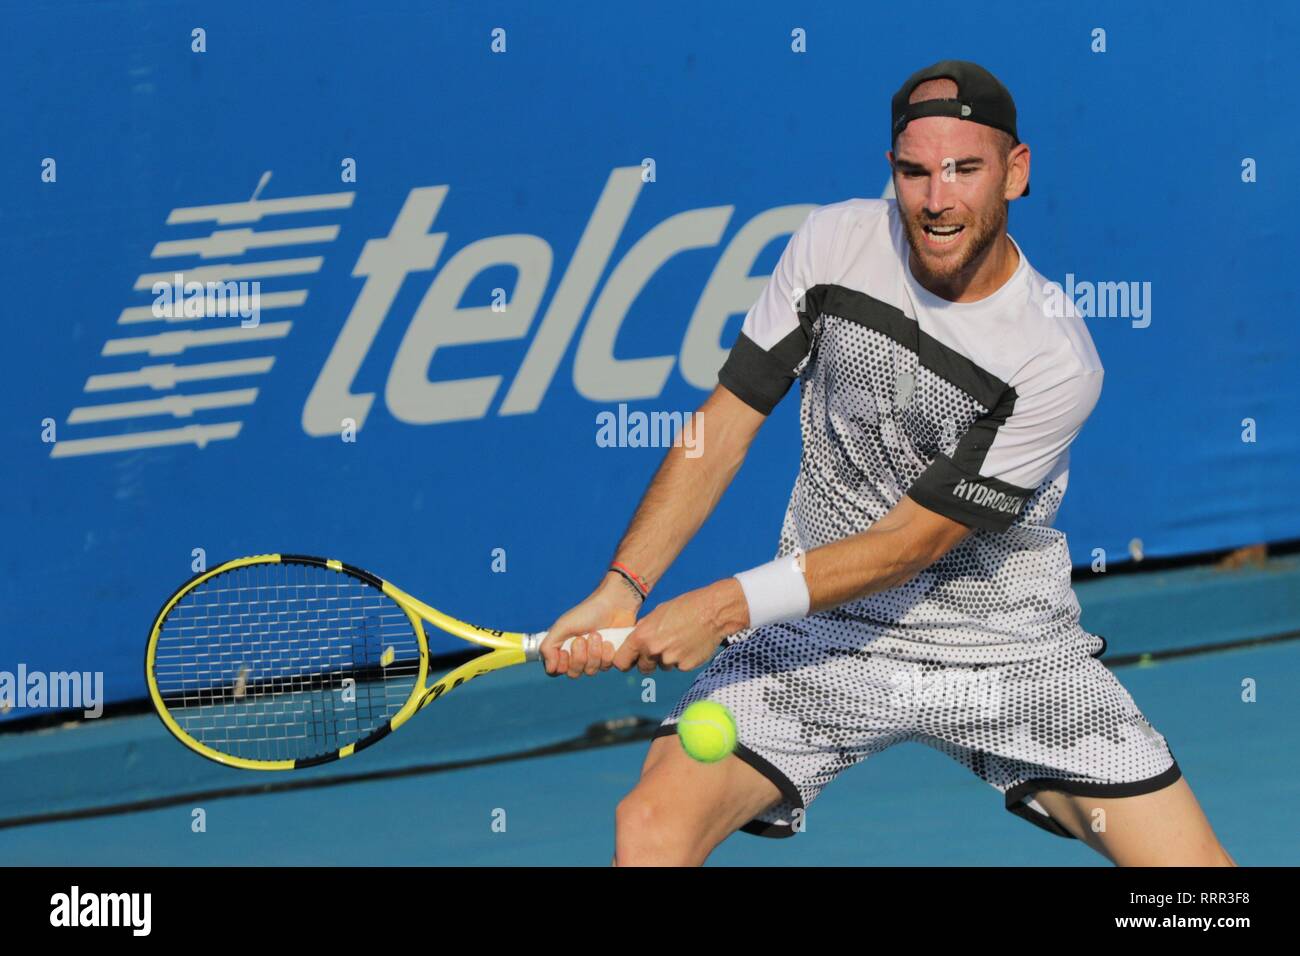 acapulco-mexico-27th-feb-2019-french-tennis-player-adrian-mannarino-returns-the-ball-to-us-john-isner-during-their-mexico-tennis-open-match-in-acapulco-guerrero-mexico-26-february-2019-credit-david-guzmanefealamy-live-news-RRR3F8.jpg